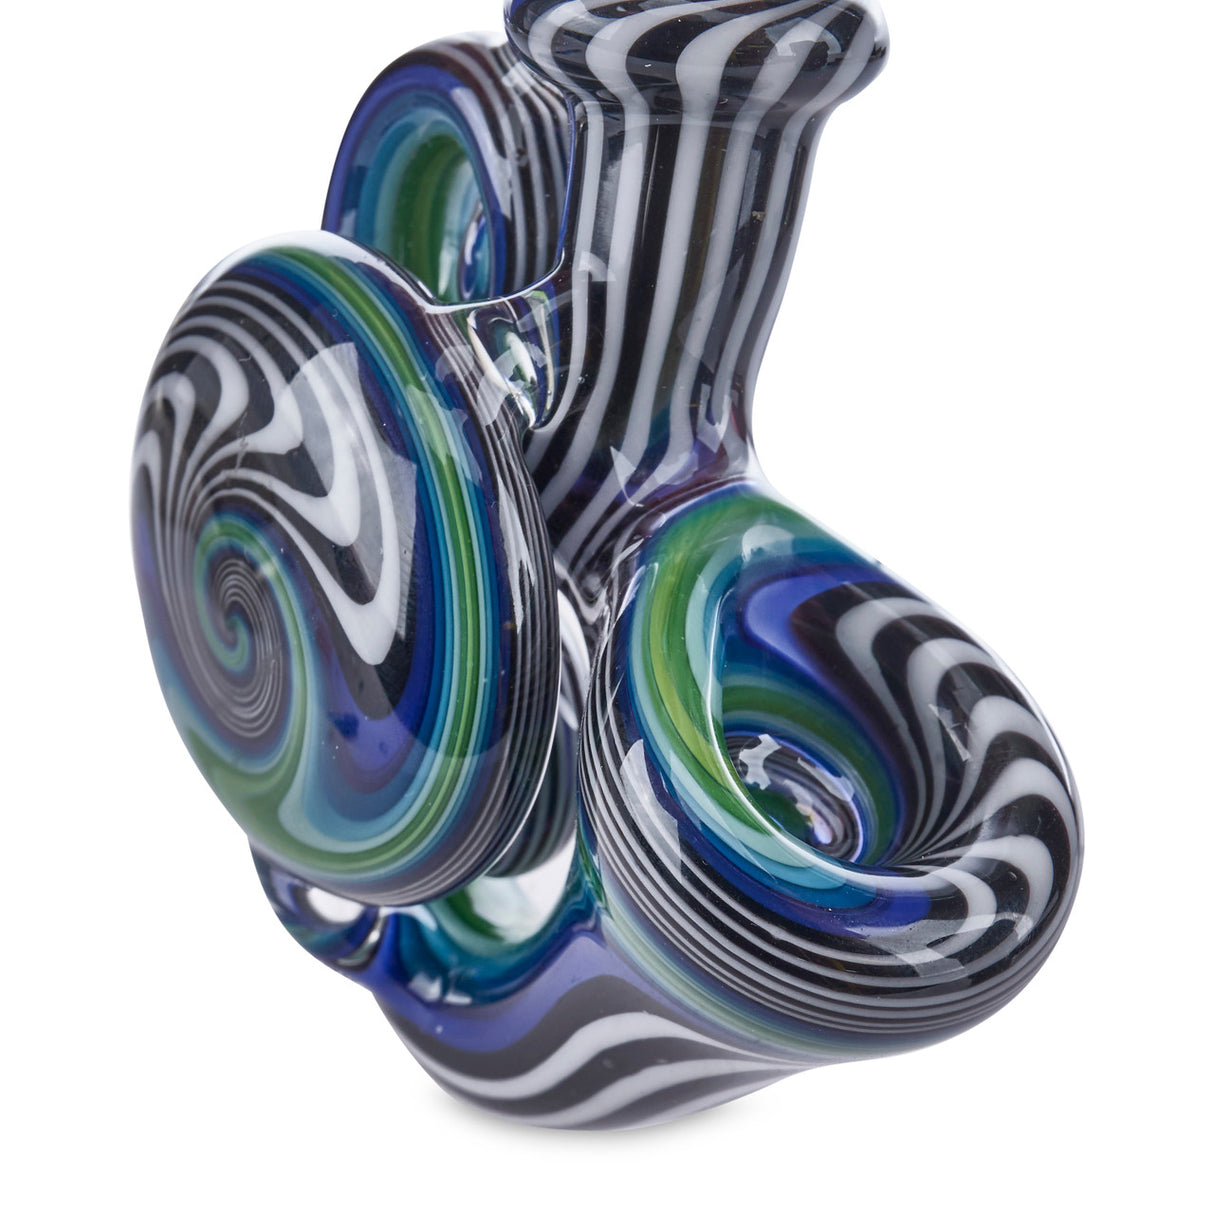 andy g worked sherlock hand pipe heady spoon online